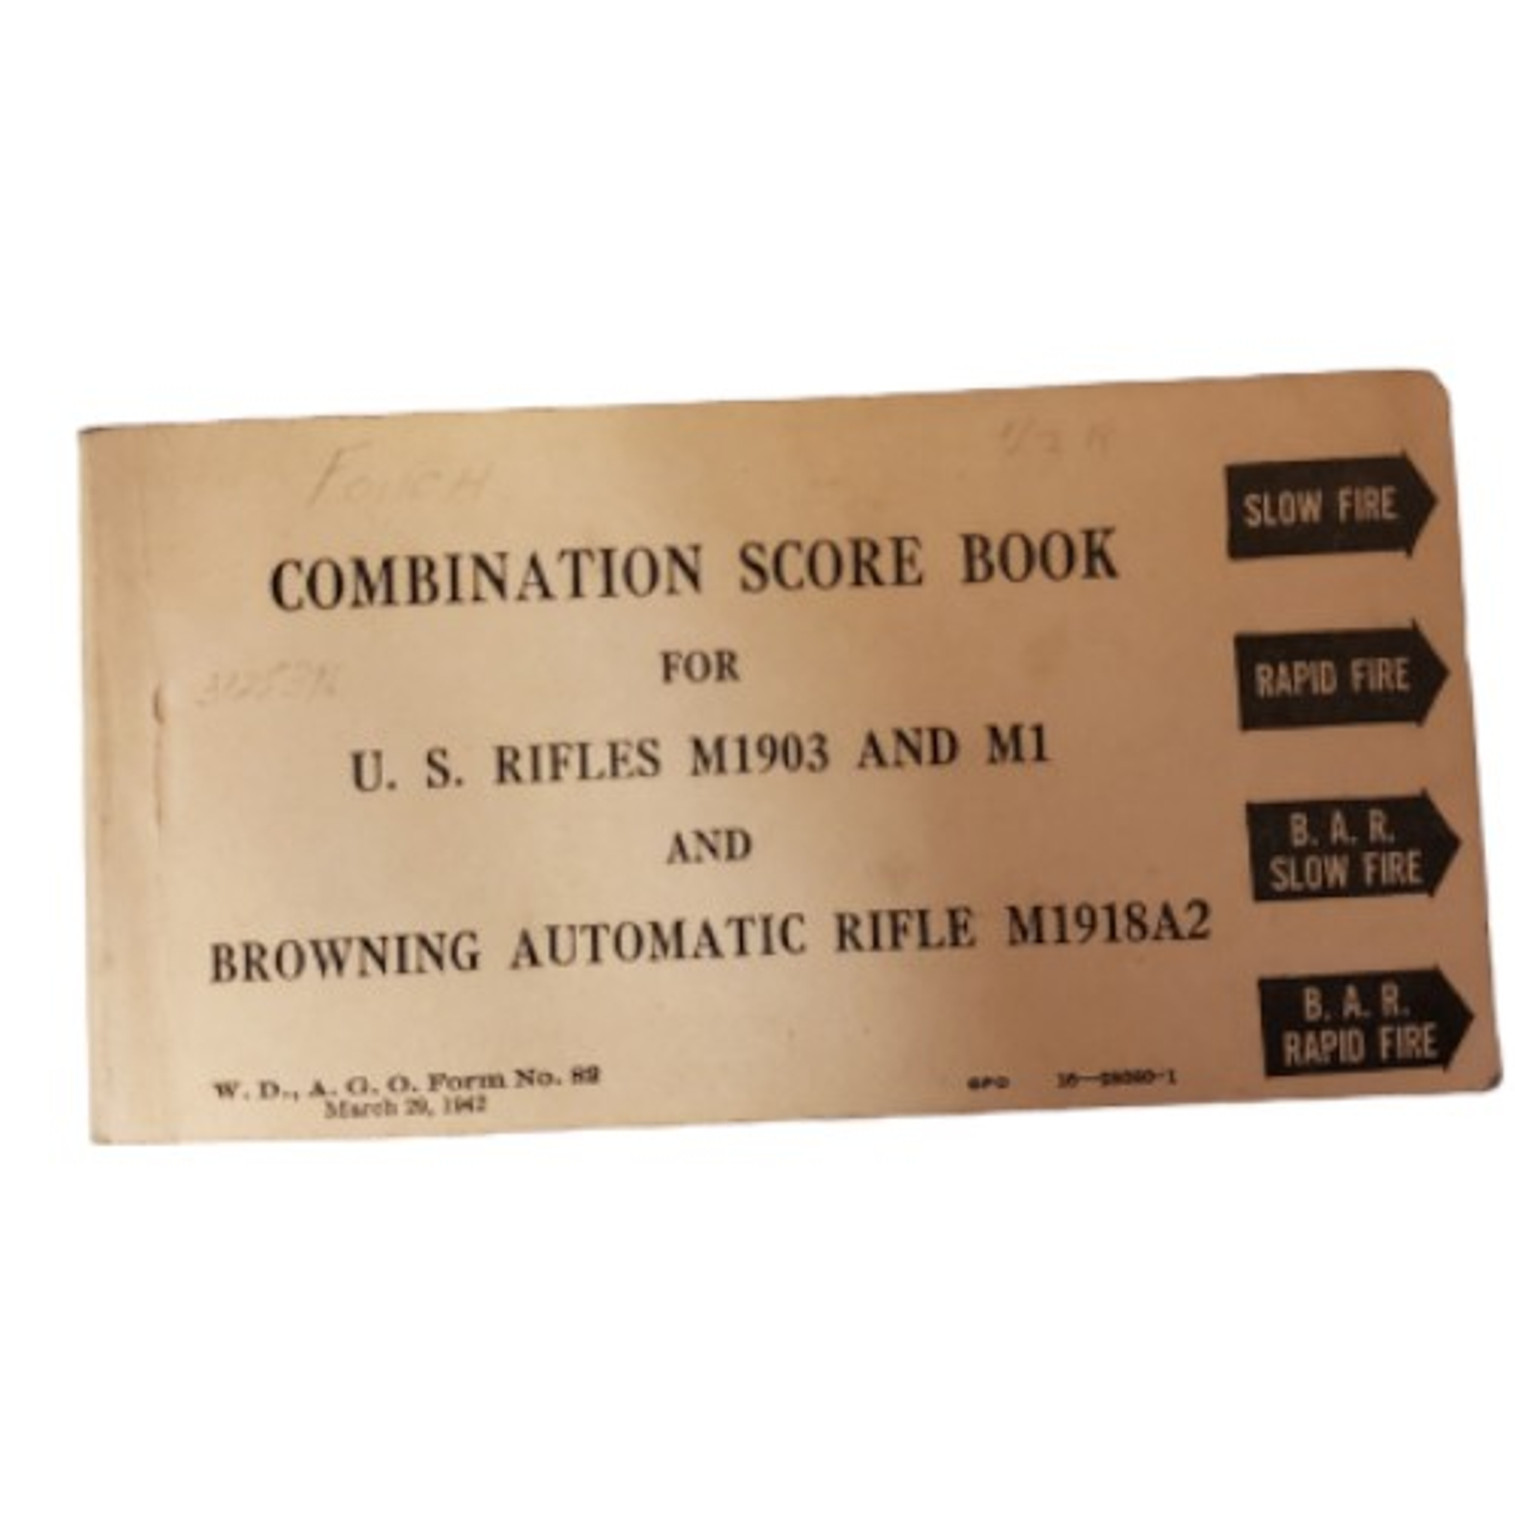 WW2 US Armed Forces Combination Score Book For U.S Rifles Dated 1942